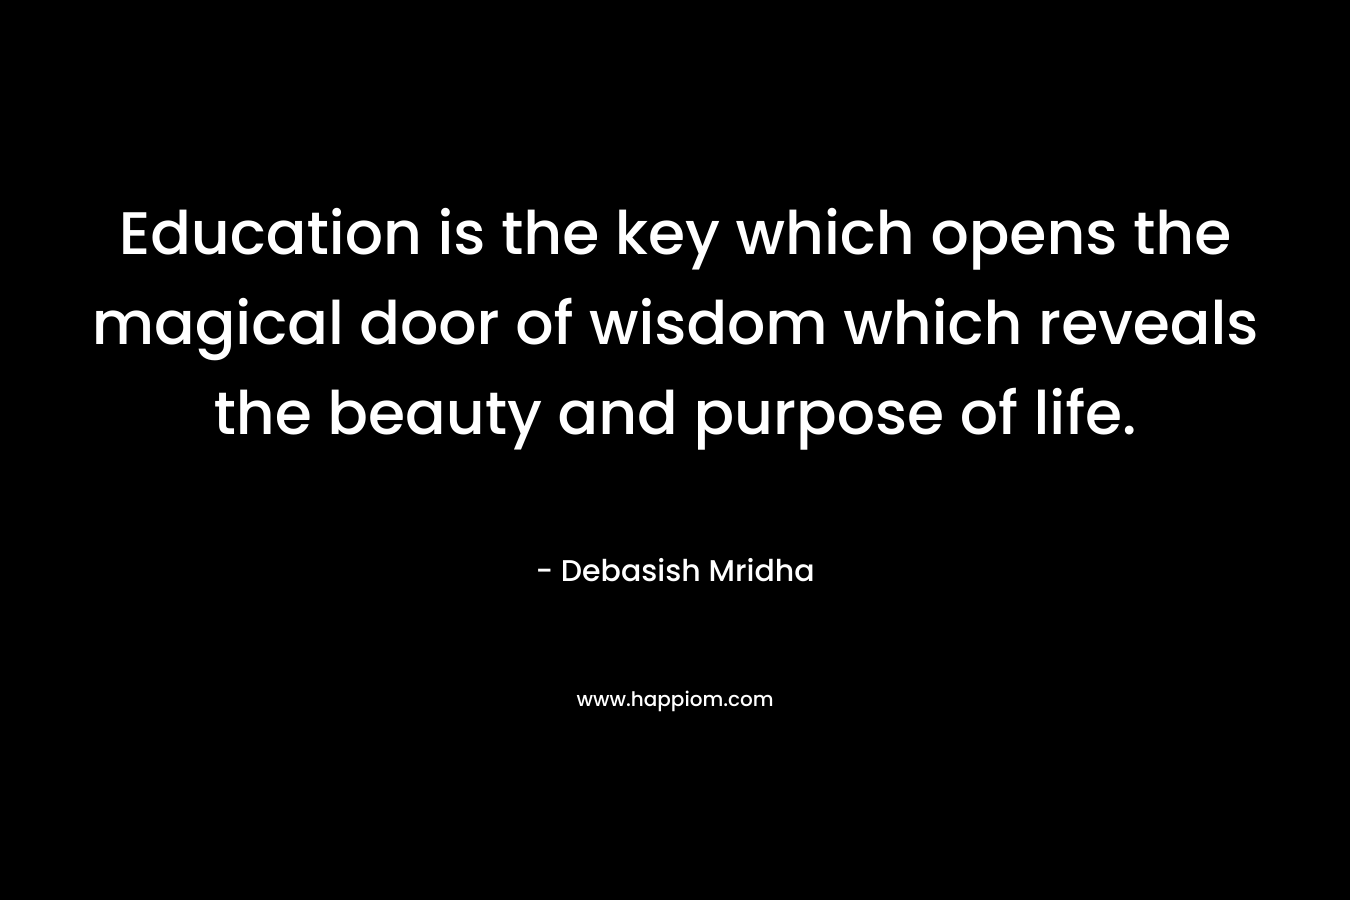 Education is the key which opens the magical door of wisdom which reveals the beauty and purpose of life.